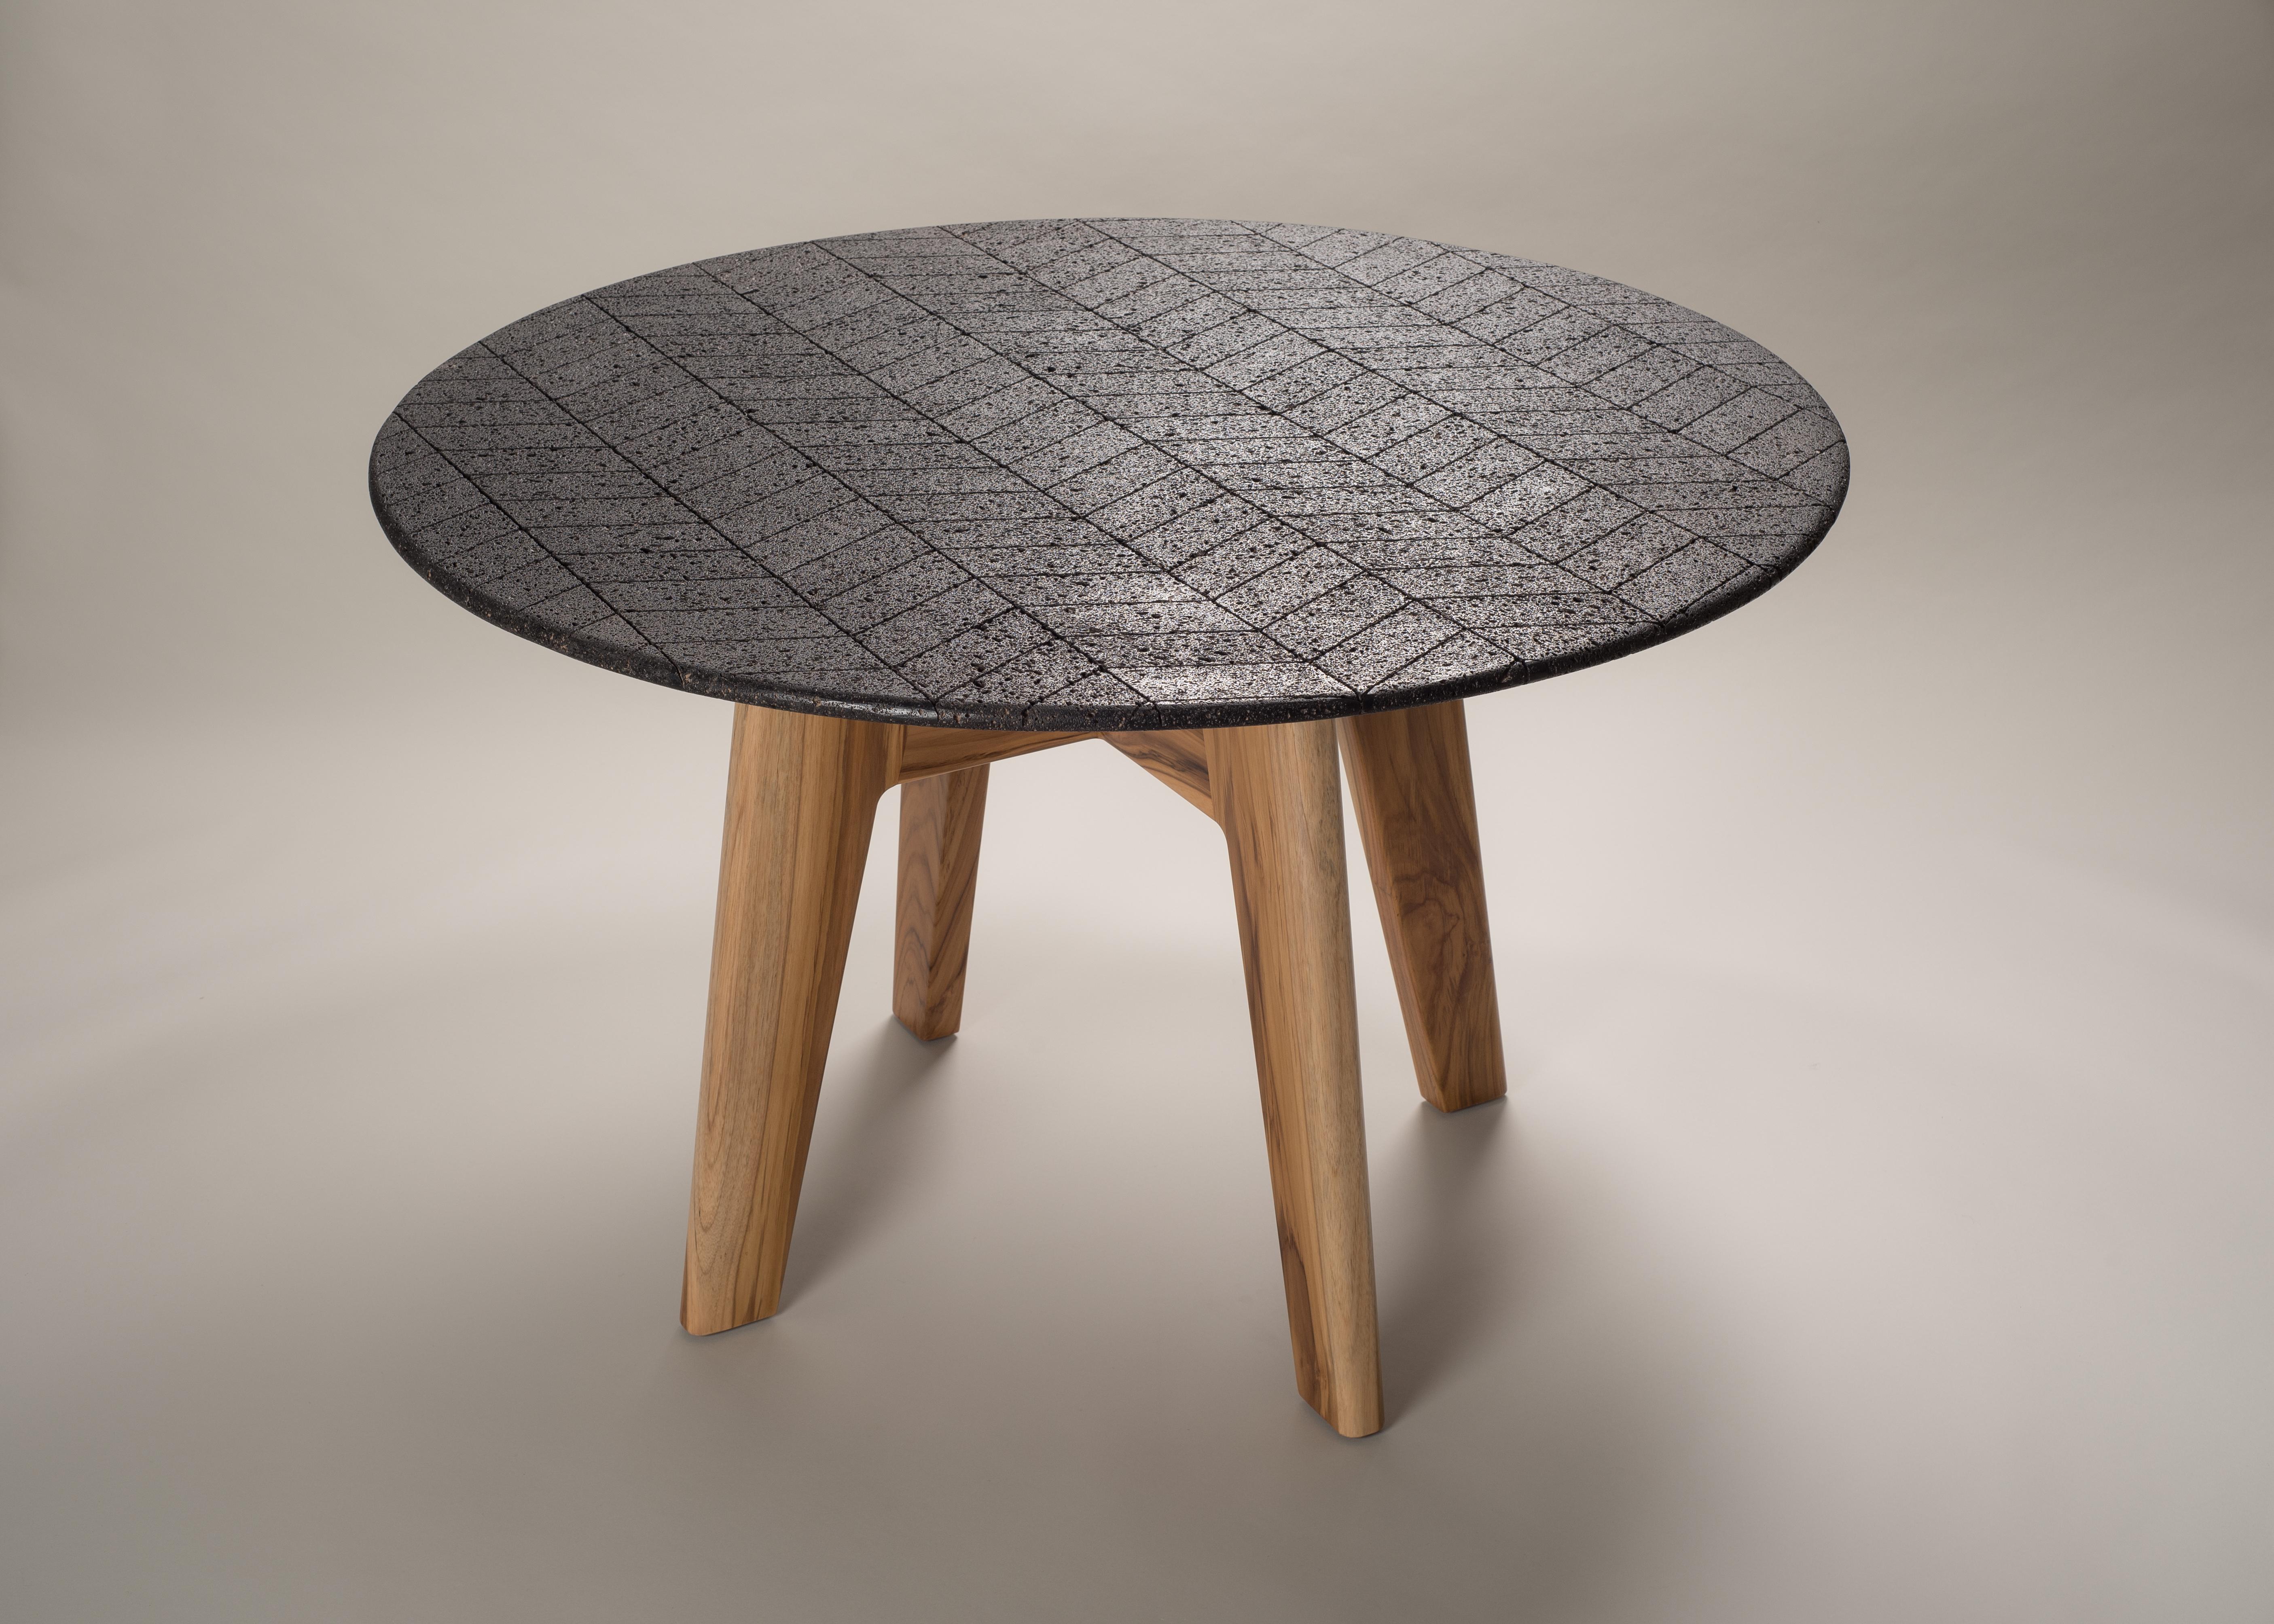 Mexico’s wealth and history emanate from the pores of its volcanic stone. It is a material that transmits strength and keeps untold stories, and Peca has mastered the art of polishing and molding it into soft, inviting objects. The lava dining table